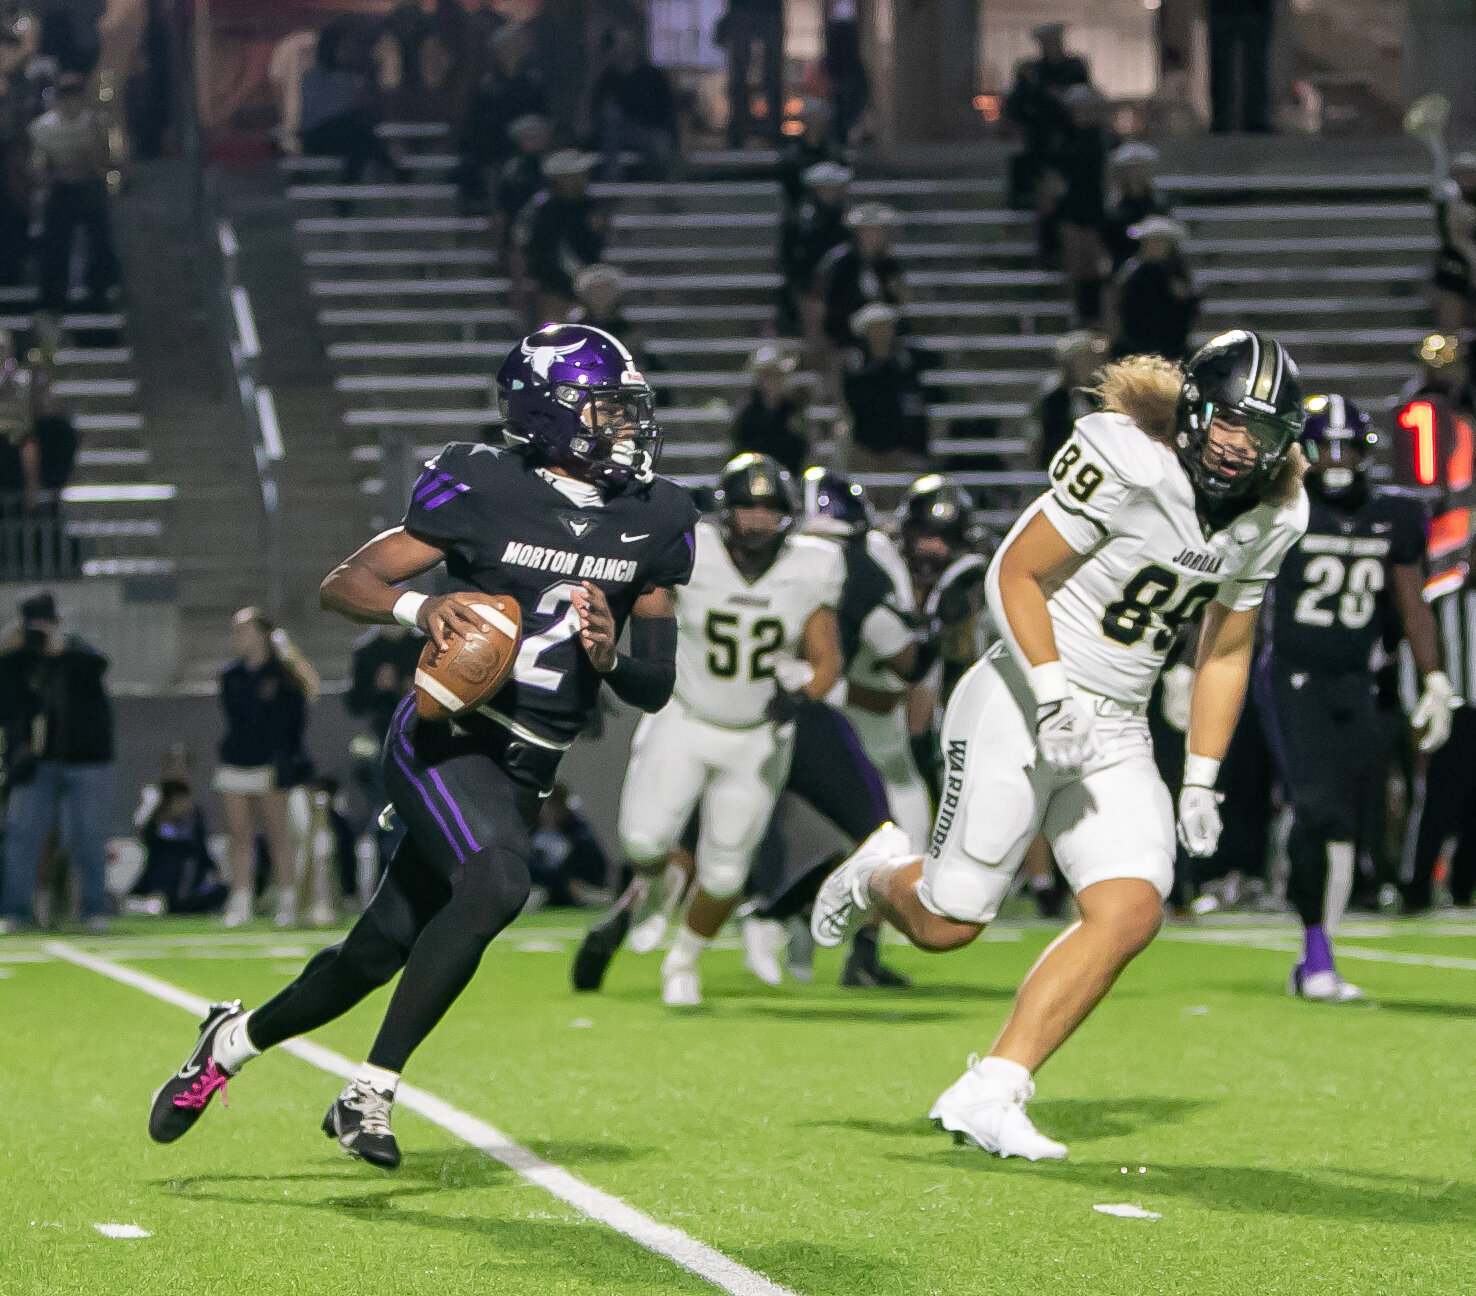 Mike Gerald looks to throw the ball during Thursday's game between Jordan and Morton Ranch at Legacy Stadium.